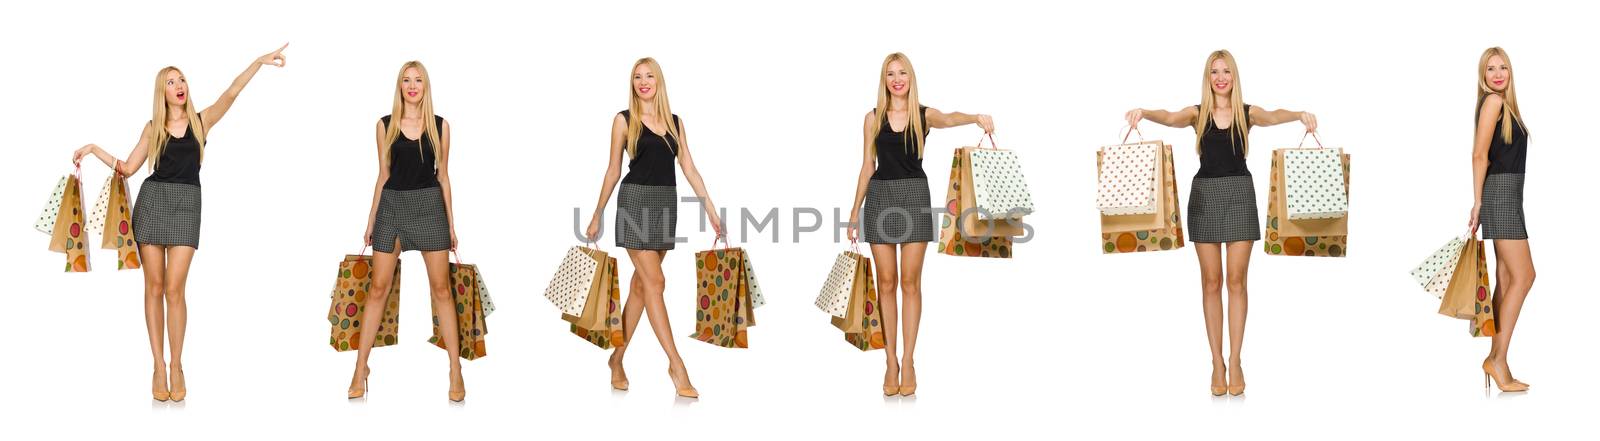 Blond hair model holding plastic bags isolated on white by Elnur